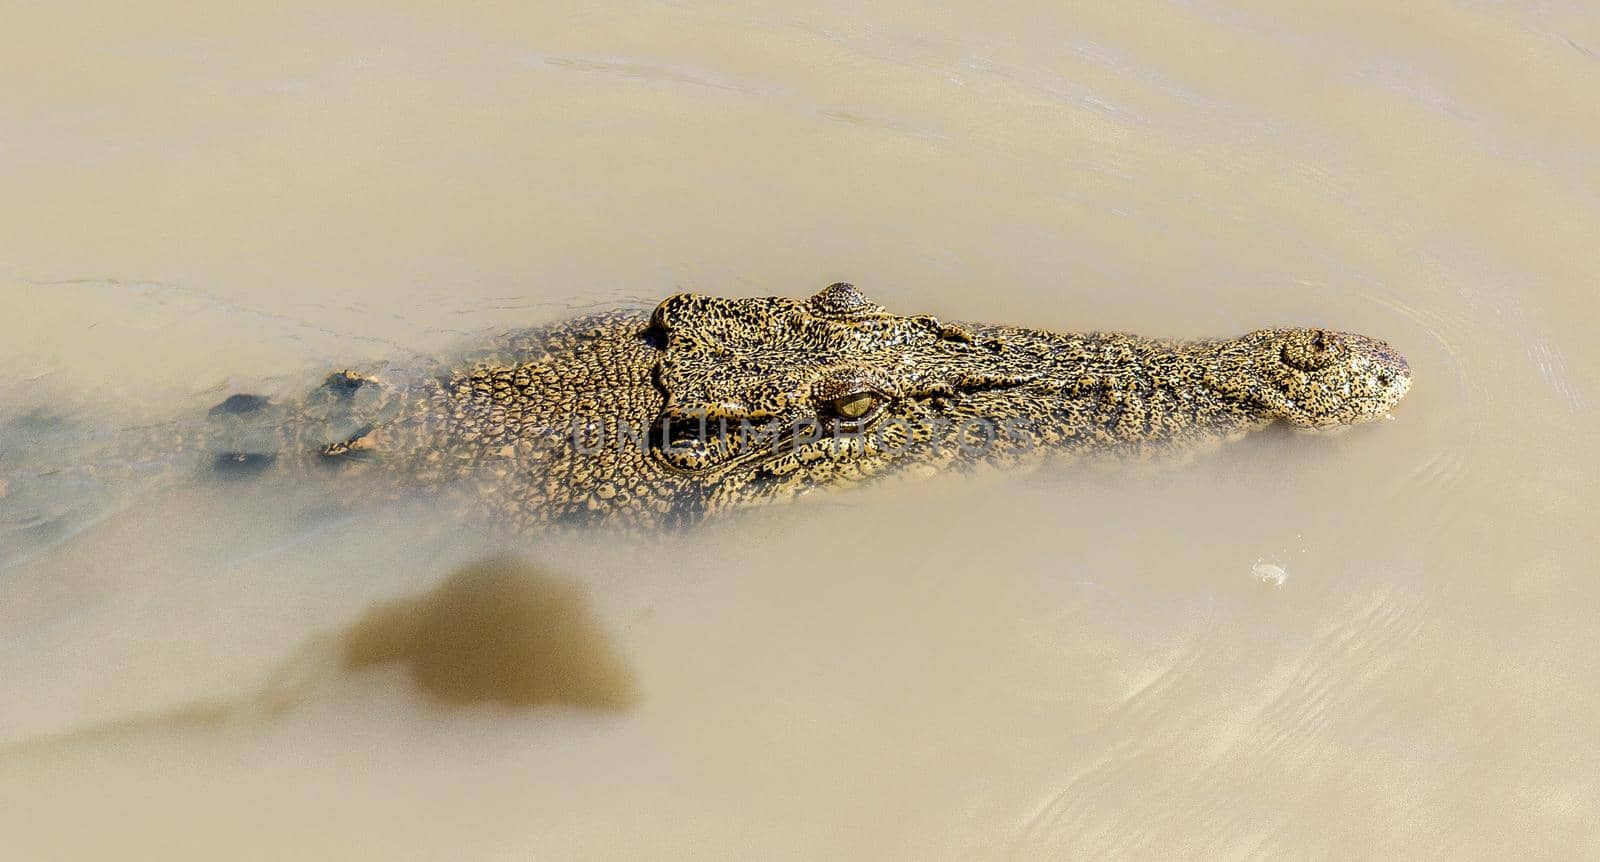 saltwater crocodile in Kakadu National Park in Australia's Northern Territory. by bettercallcurry